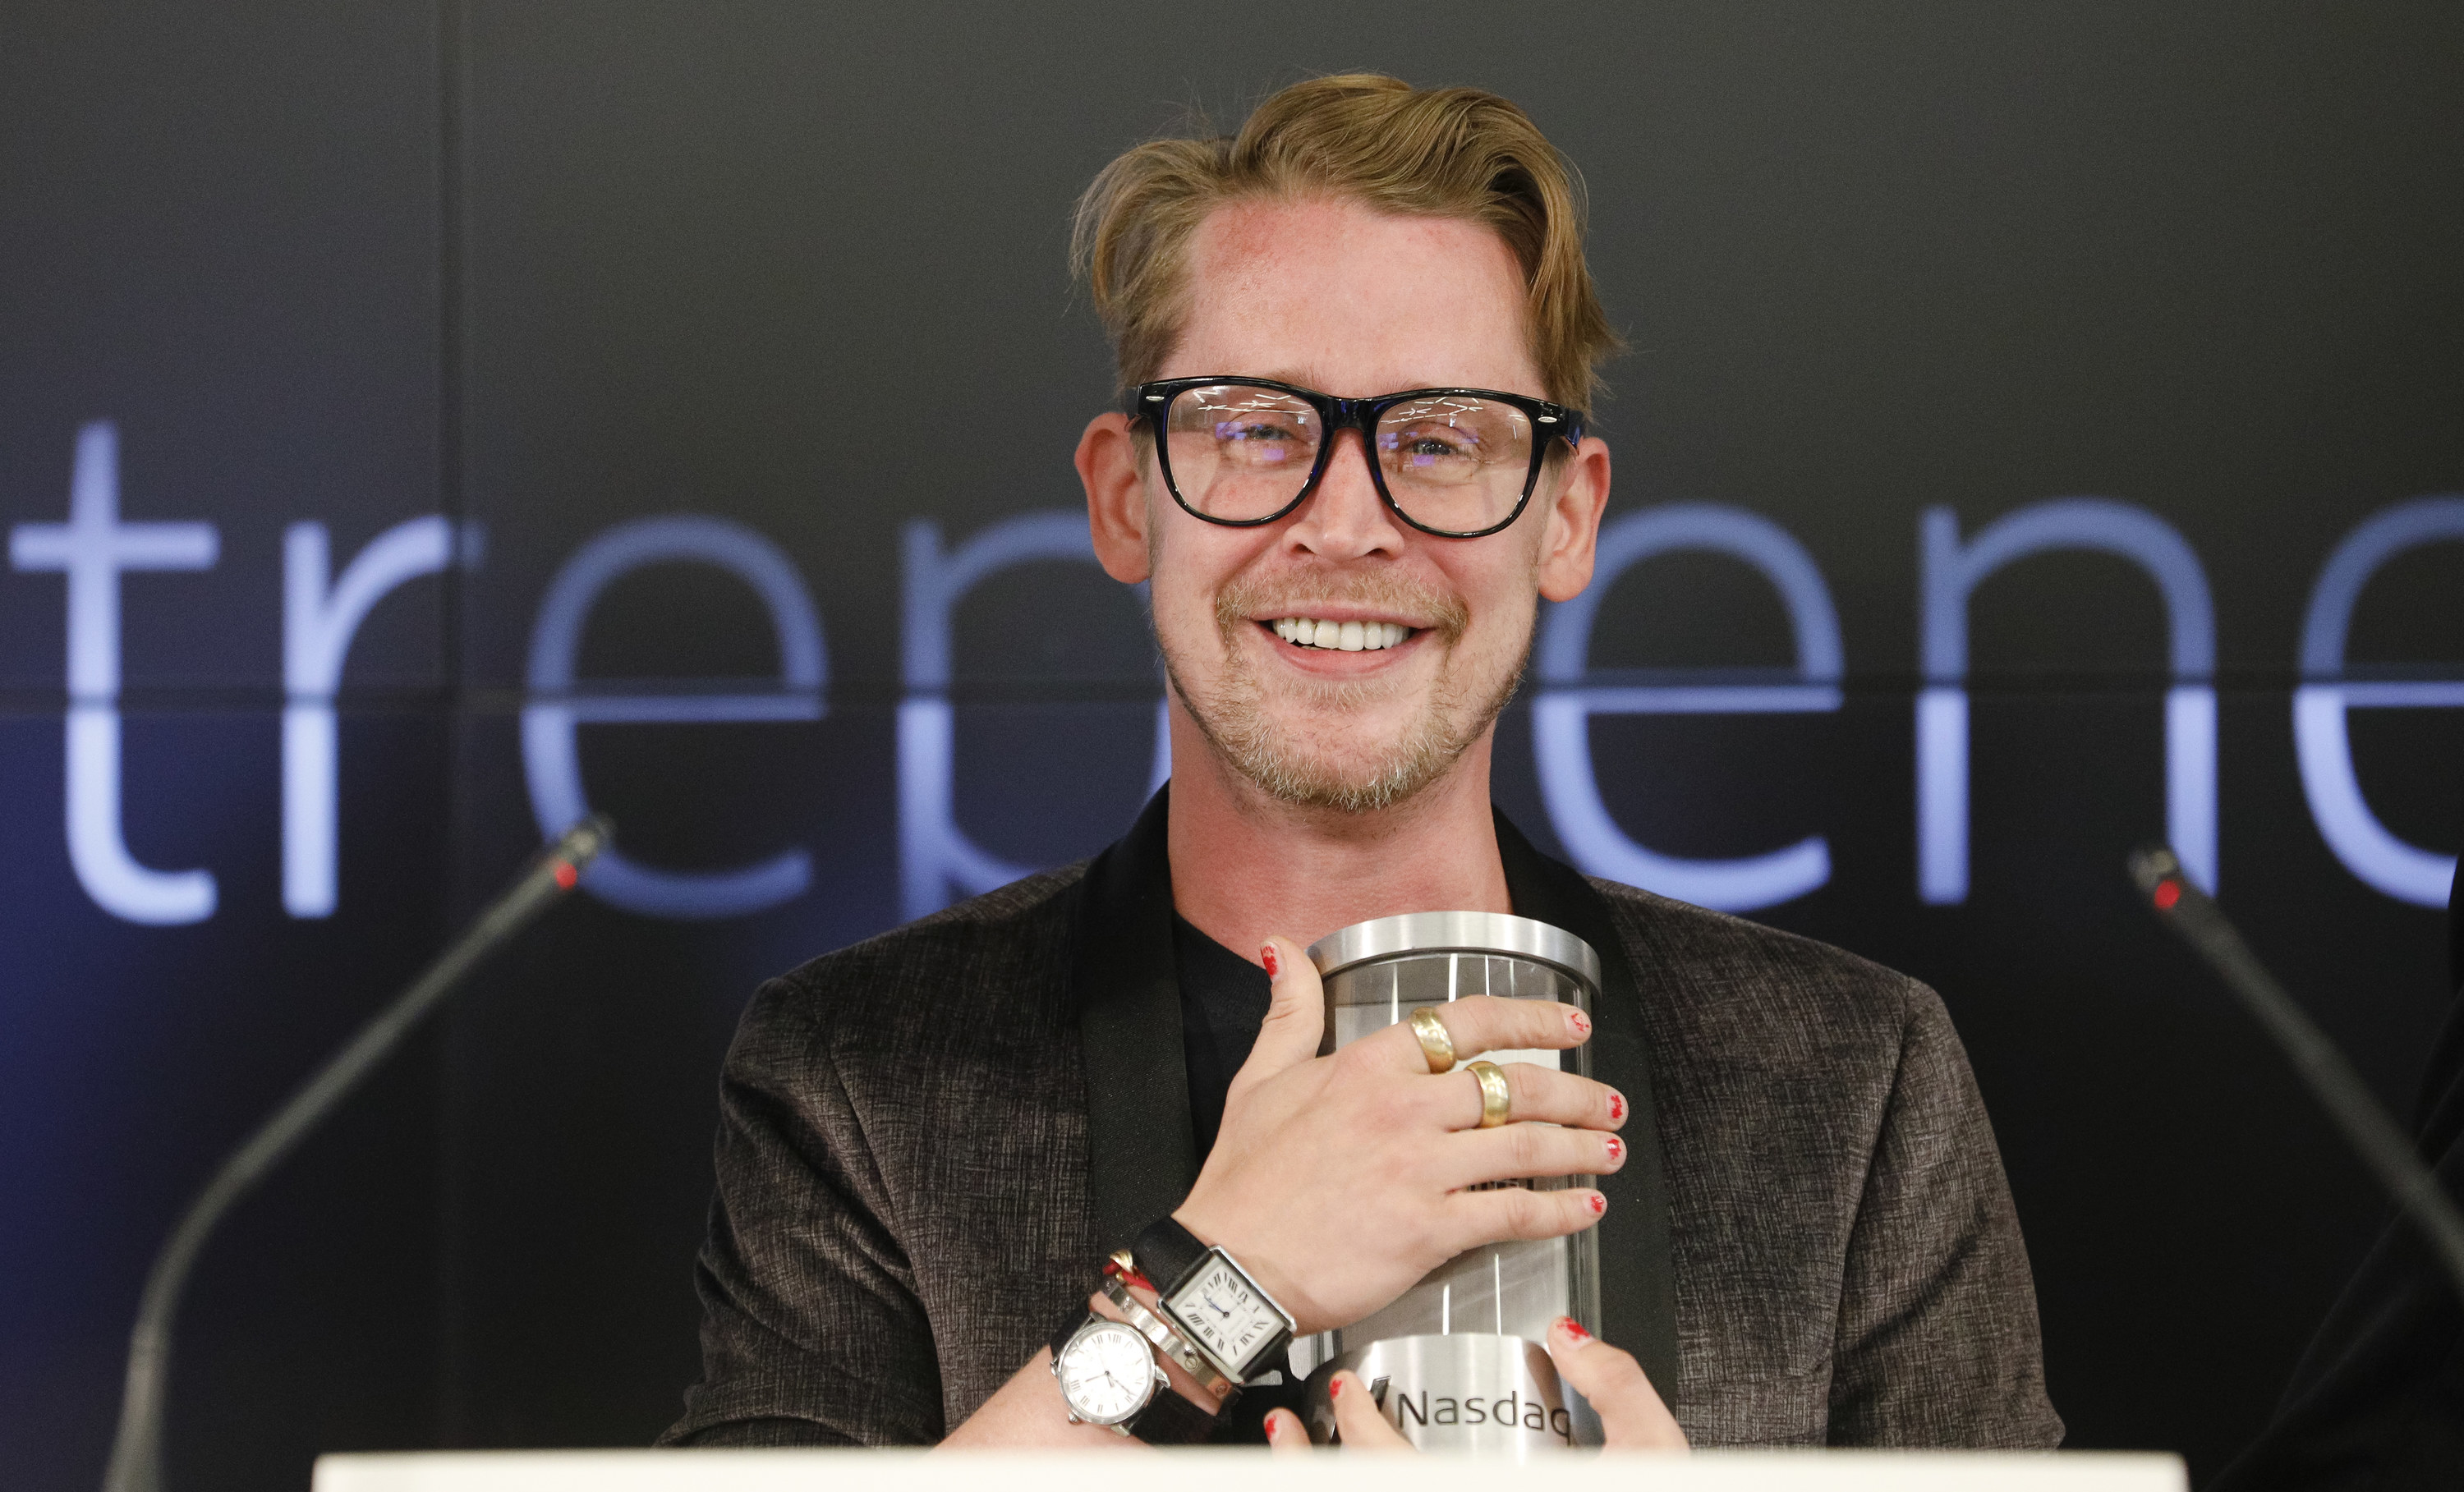 Macauley wearing large black rimmed glasses, and smiling widely while holding a capsule of some sort